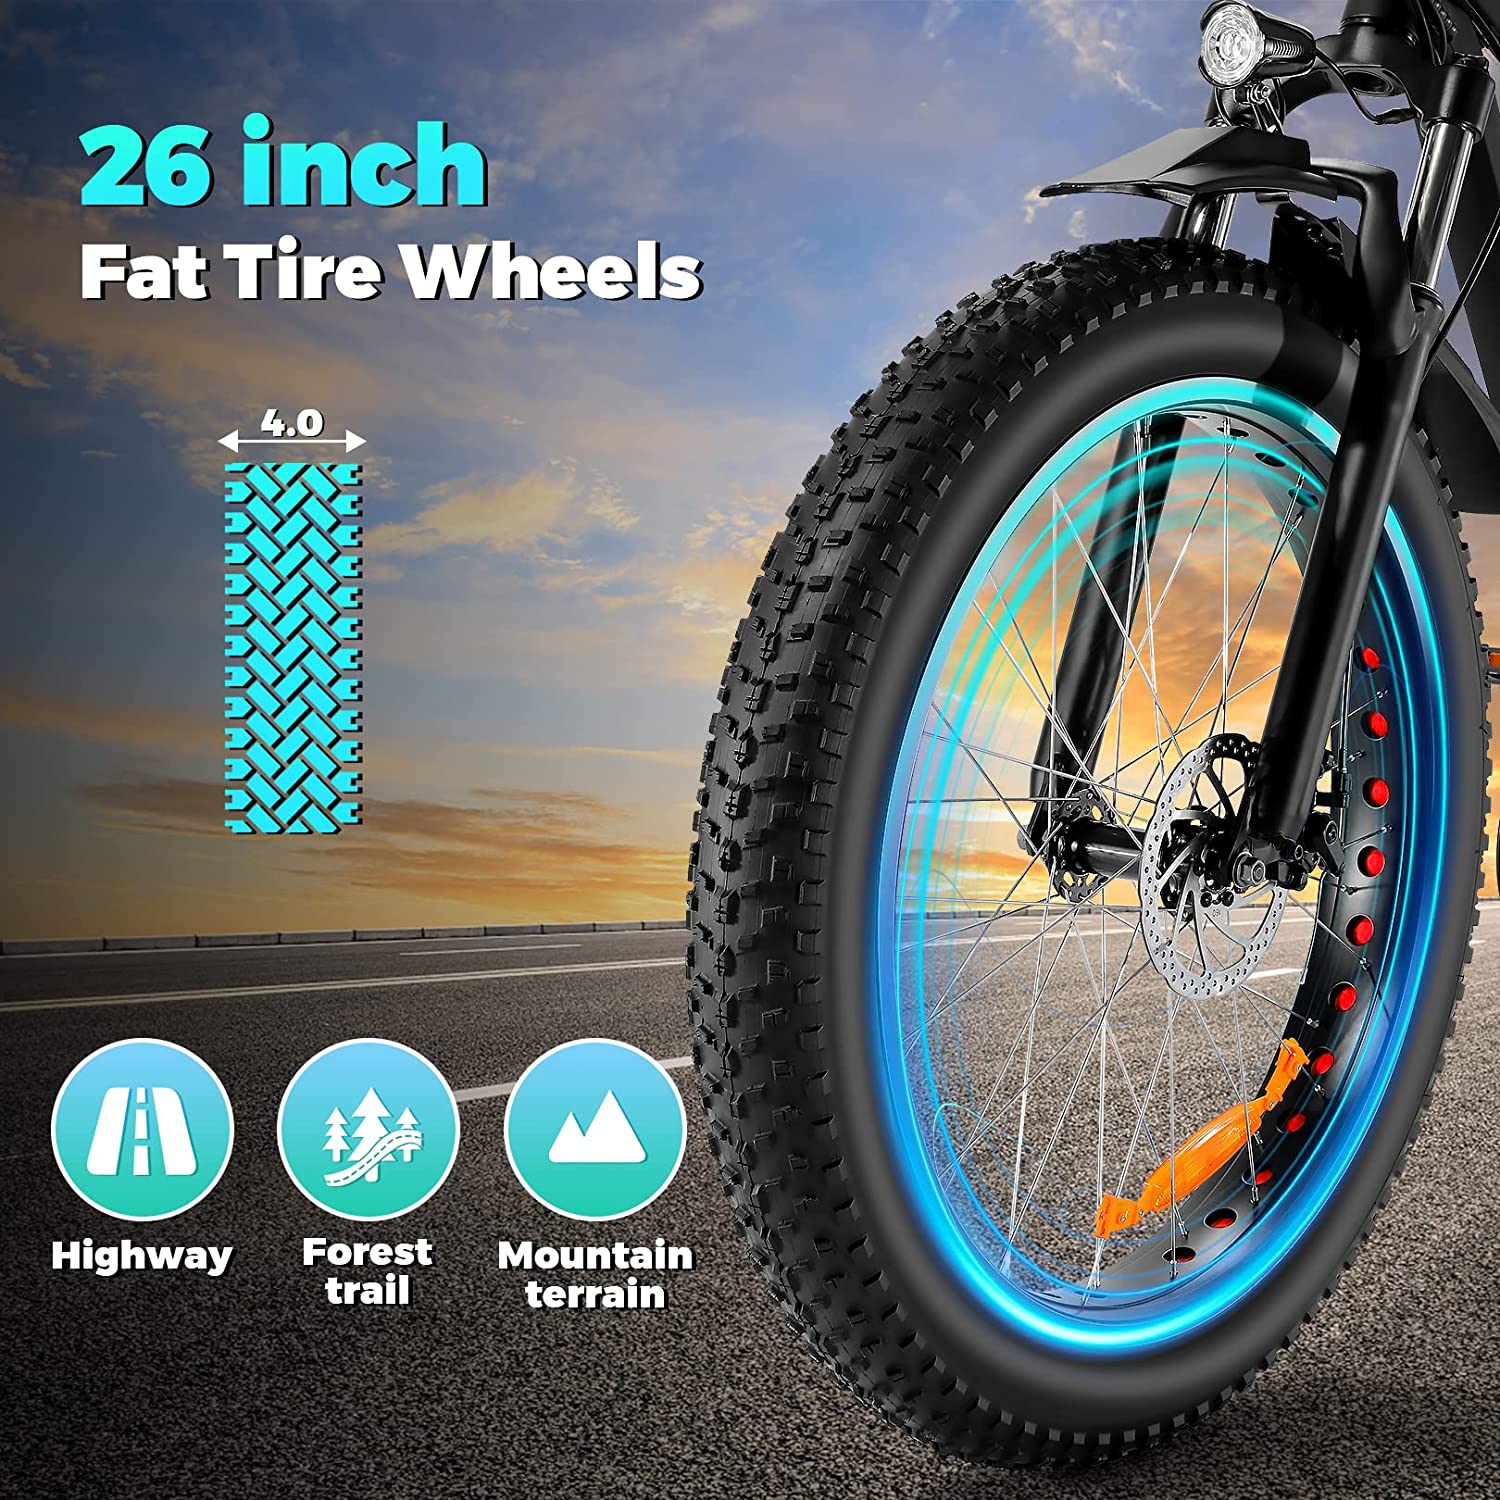 Electric Bike, 26" x 4" Fat Tire Electric Bike for Adults 500W 19.8MPH Electric Mountain Bicycle Snow Beach Ebike, 48V 10.4Ah Battery, Lockable Suspension Fork, LCD Display, Fast Charge, Red - image 6 of 16